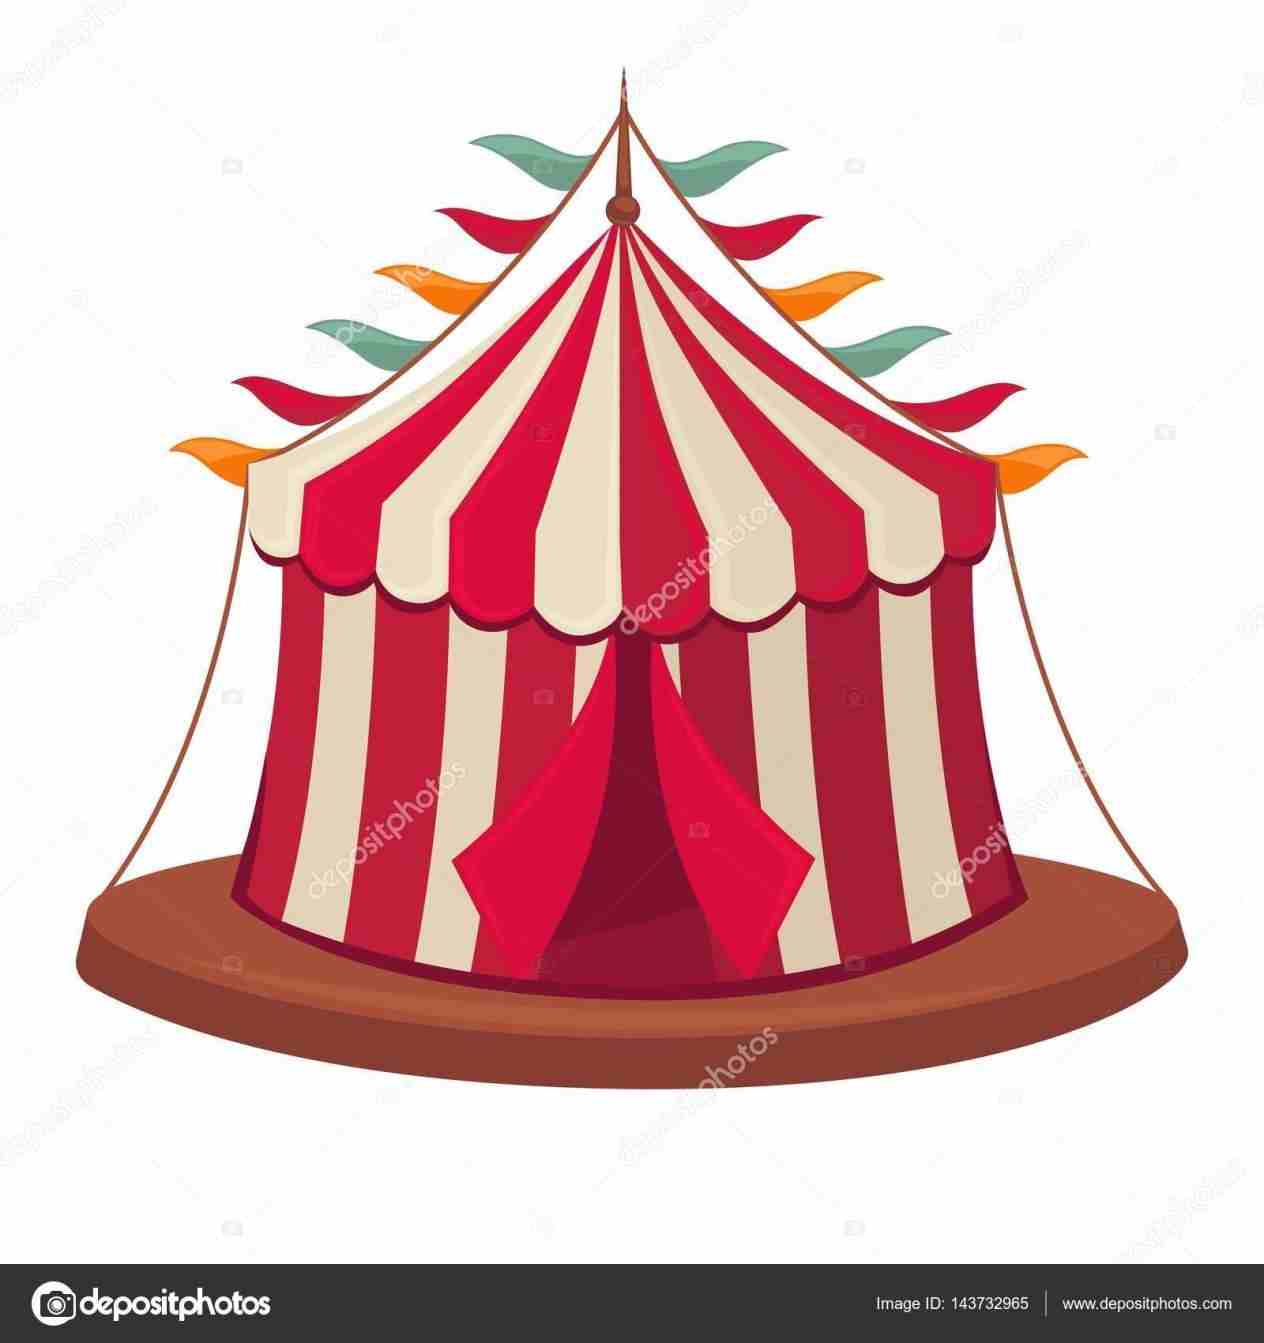 1388 Tent free clipart.